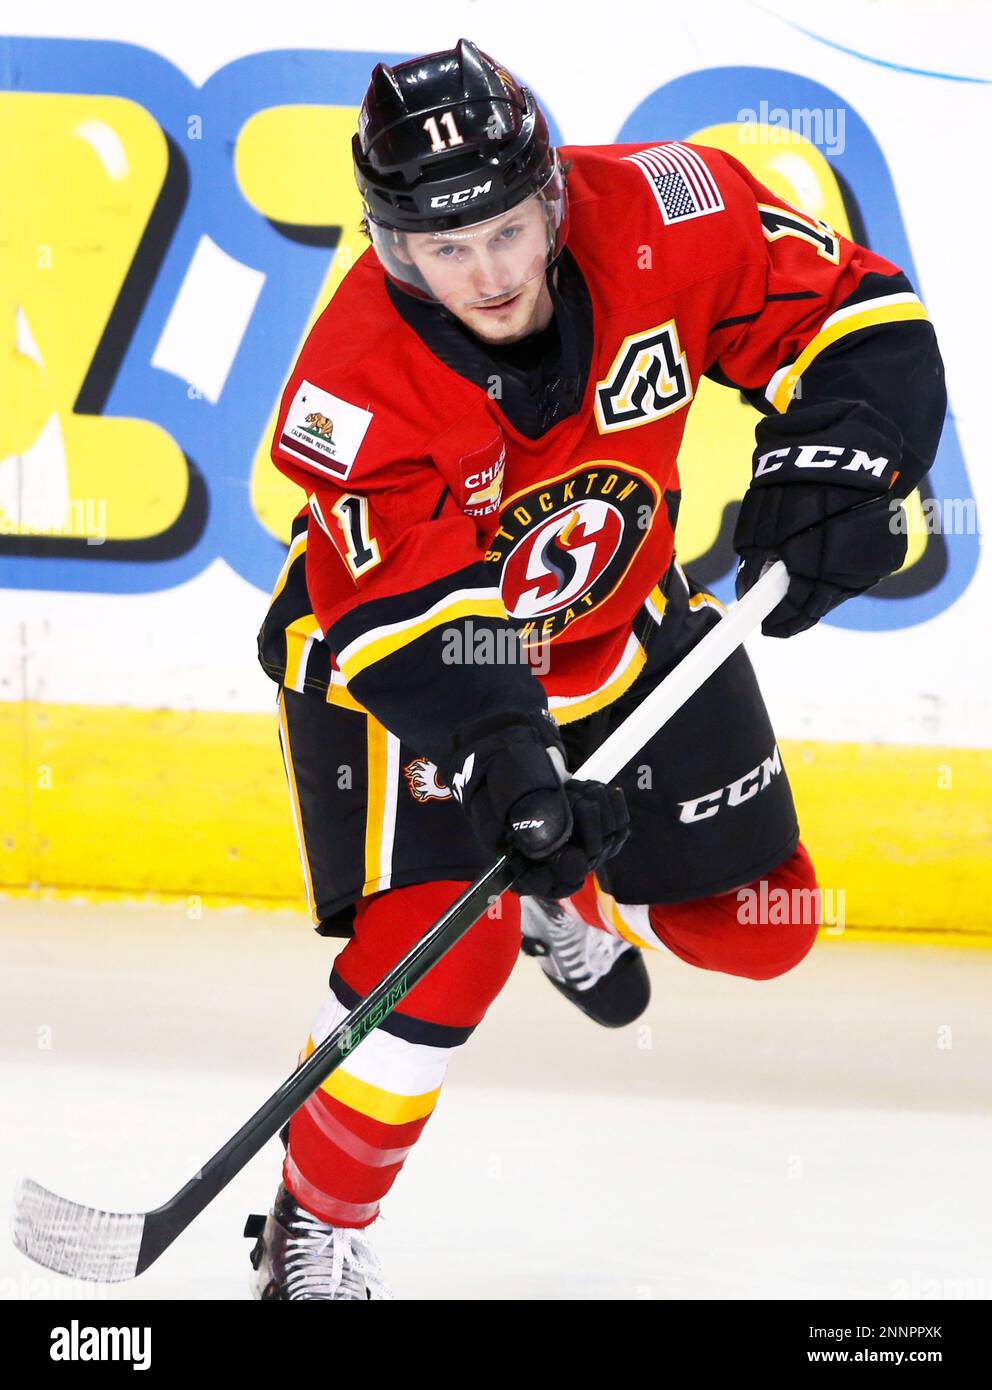 AHL (American Hockey League) profile photo on Stockton Heat player Matthew Phillips during a game against the Toronto Marlies in Calgary, Ab. on Feb